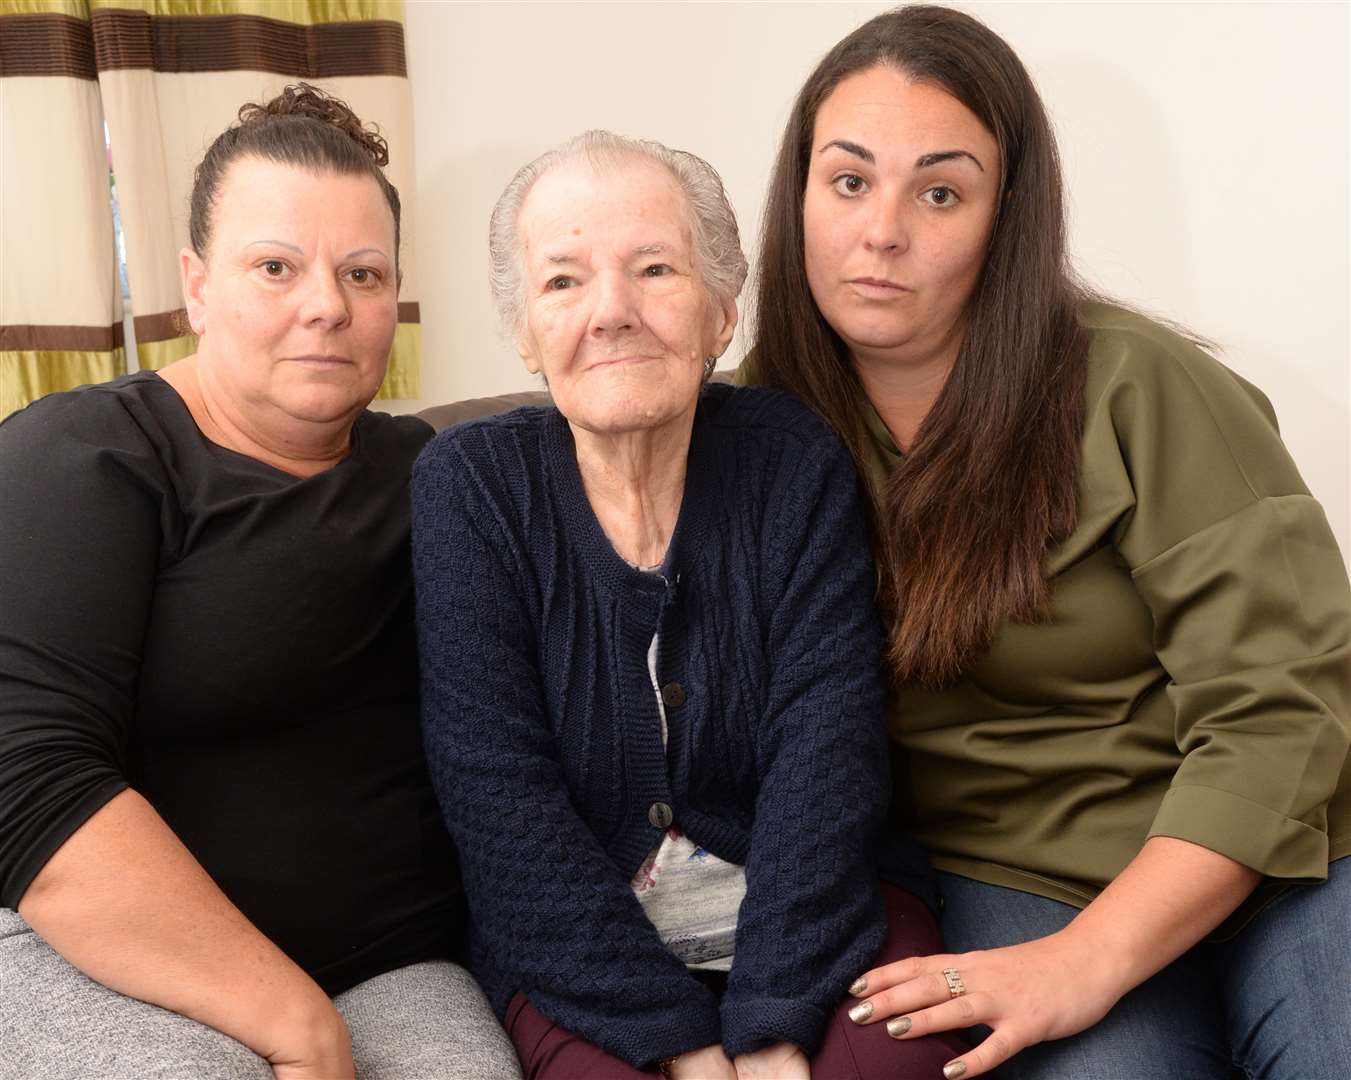 Beryl Harris, 87 of Leysdown, with daughter and granddaughter Tina and Gemma Cunningham, was locked on an Age UK bus for three hours. Picture: Chris Davey